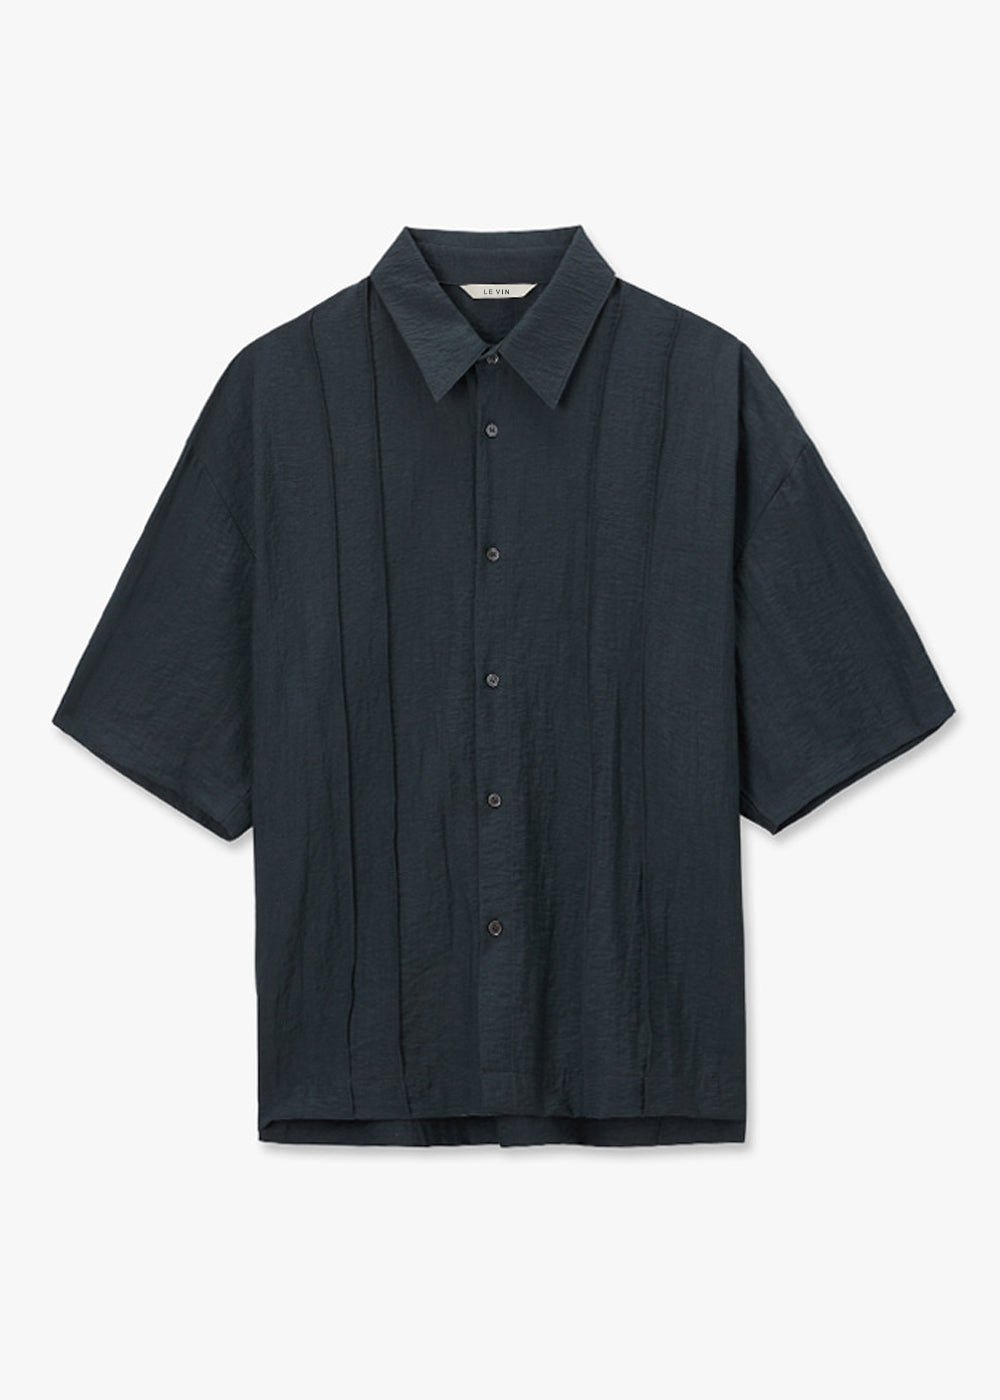 PIN TUCK POINT HALF SLEEVE SHIRTS_CHARCOAL – LE VIN